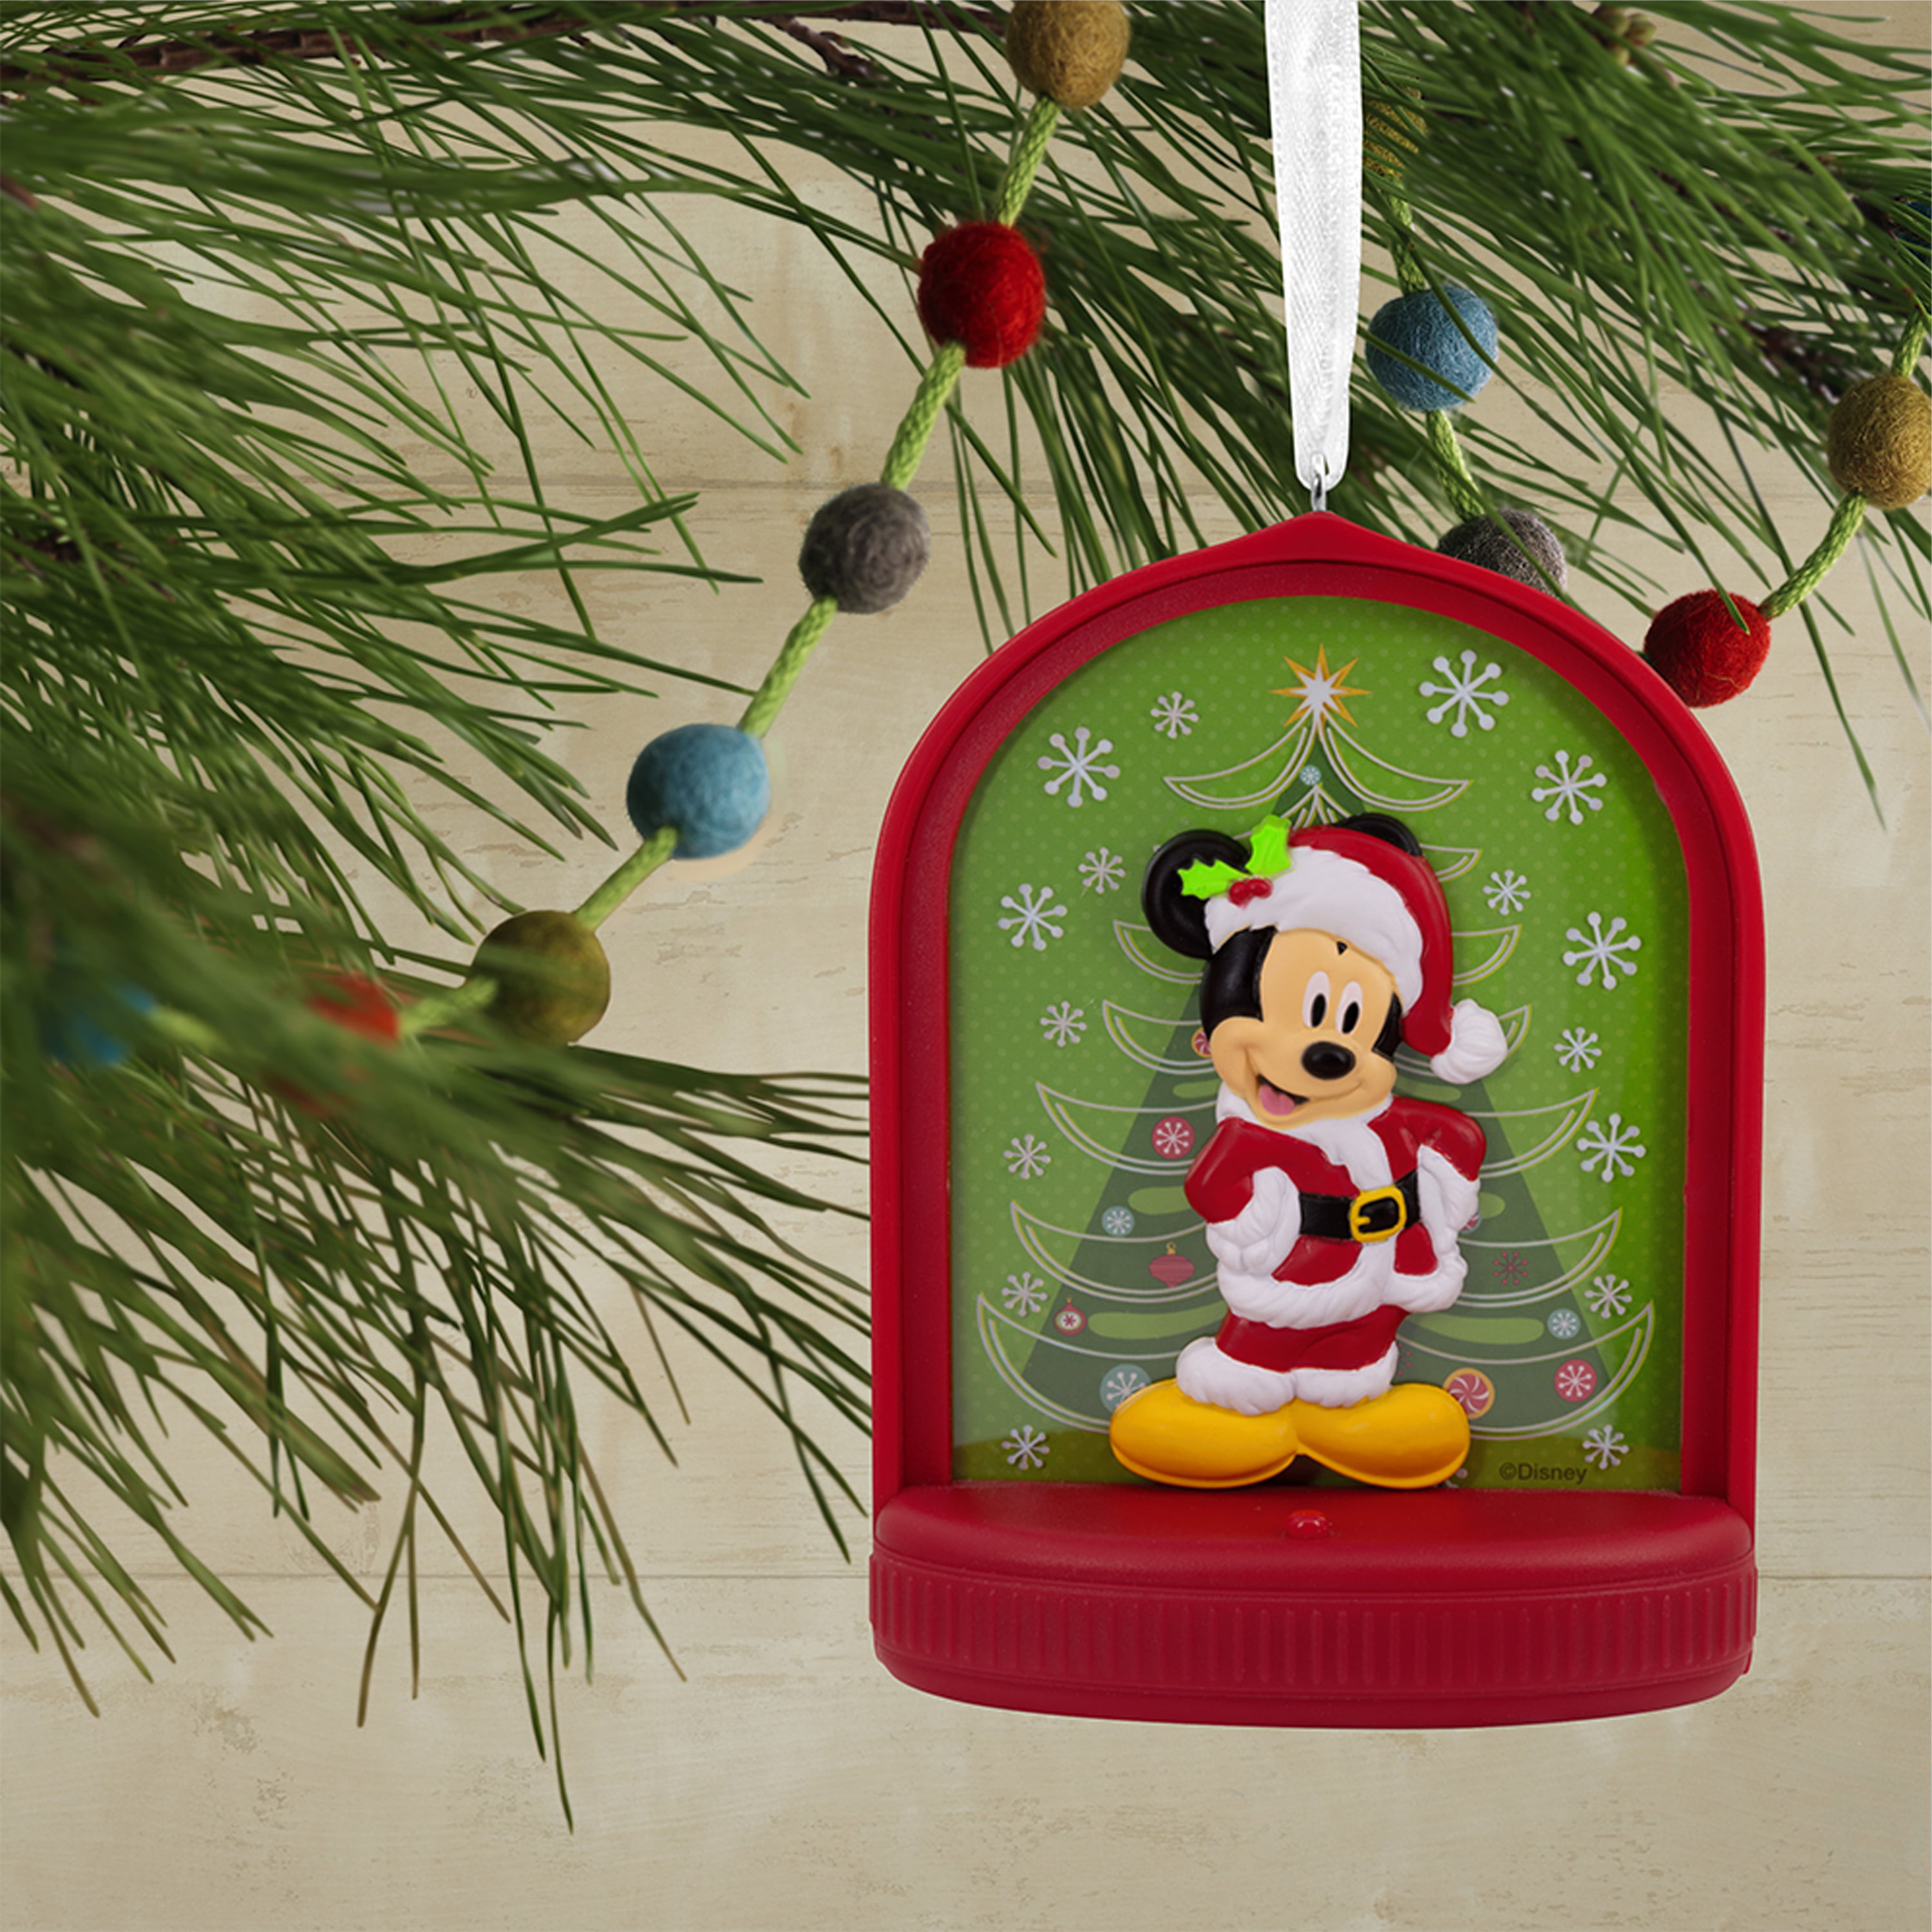 Details about   Disney Holiday Ornament Santa Mickey on Roof Bas-Relief Lighted #9 **NEW** 